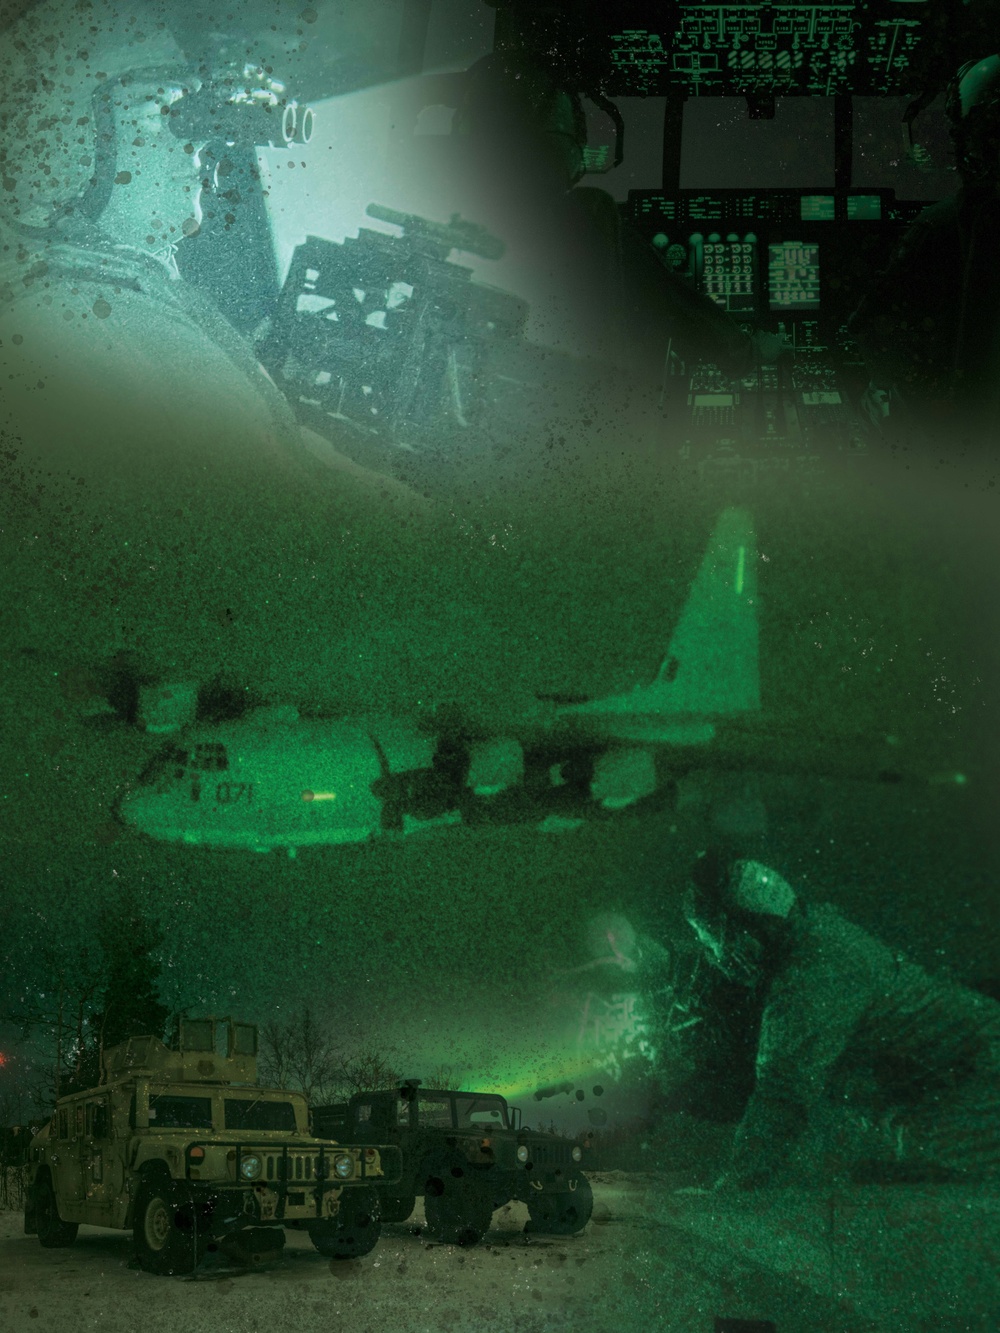 2nd Marine Aircraft Wing Collage